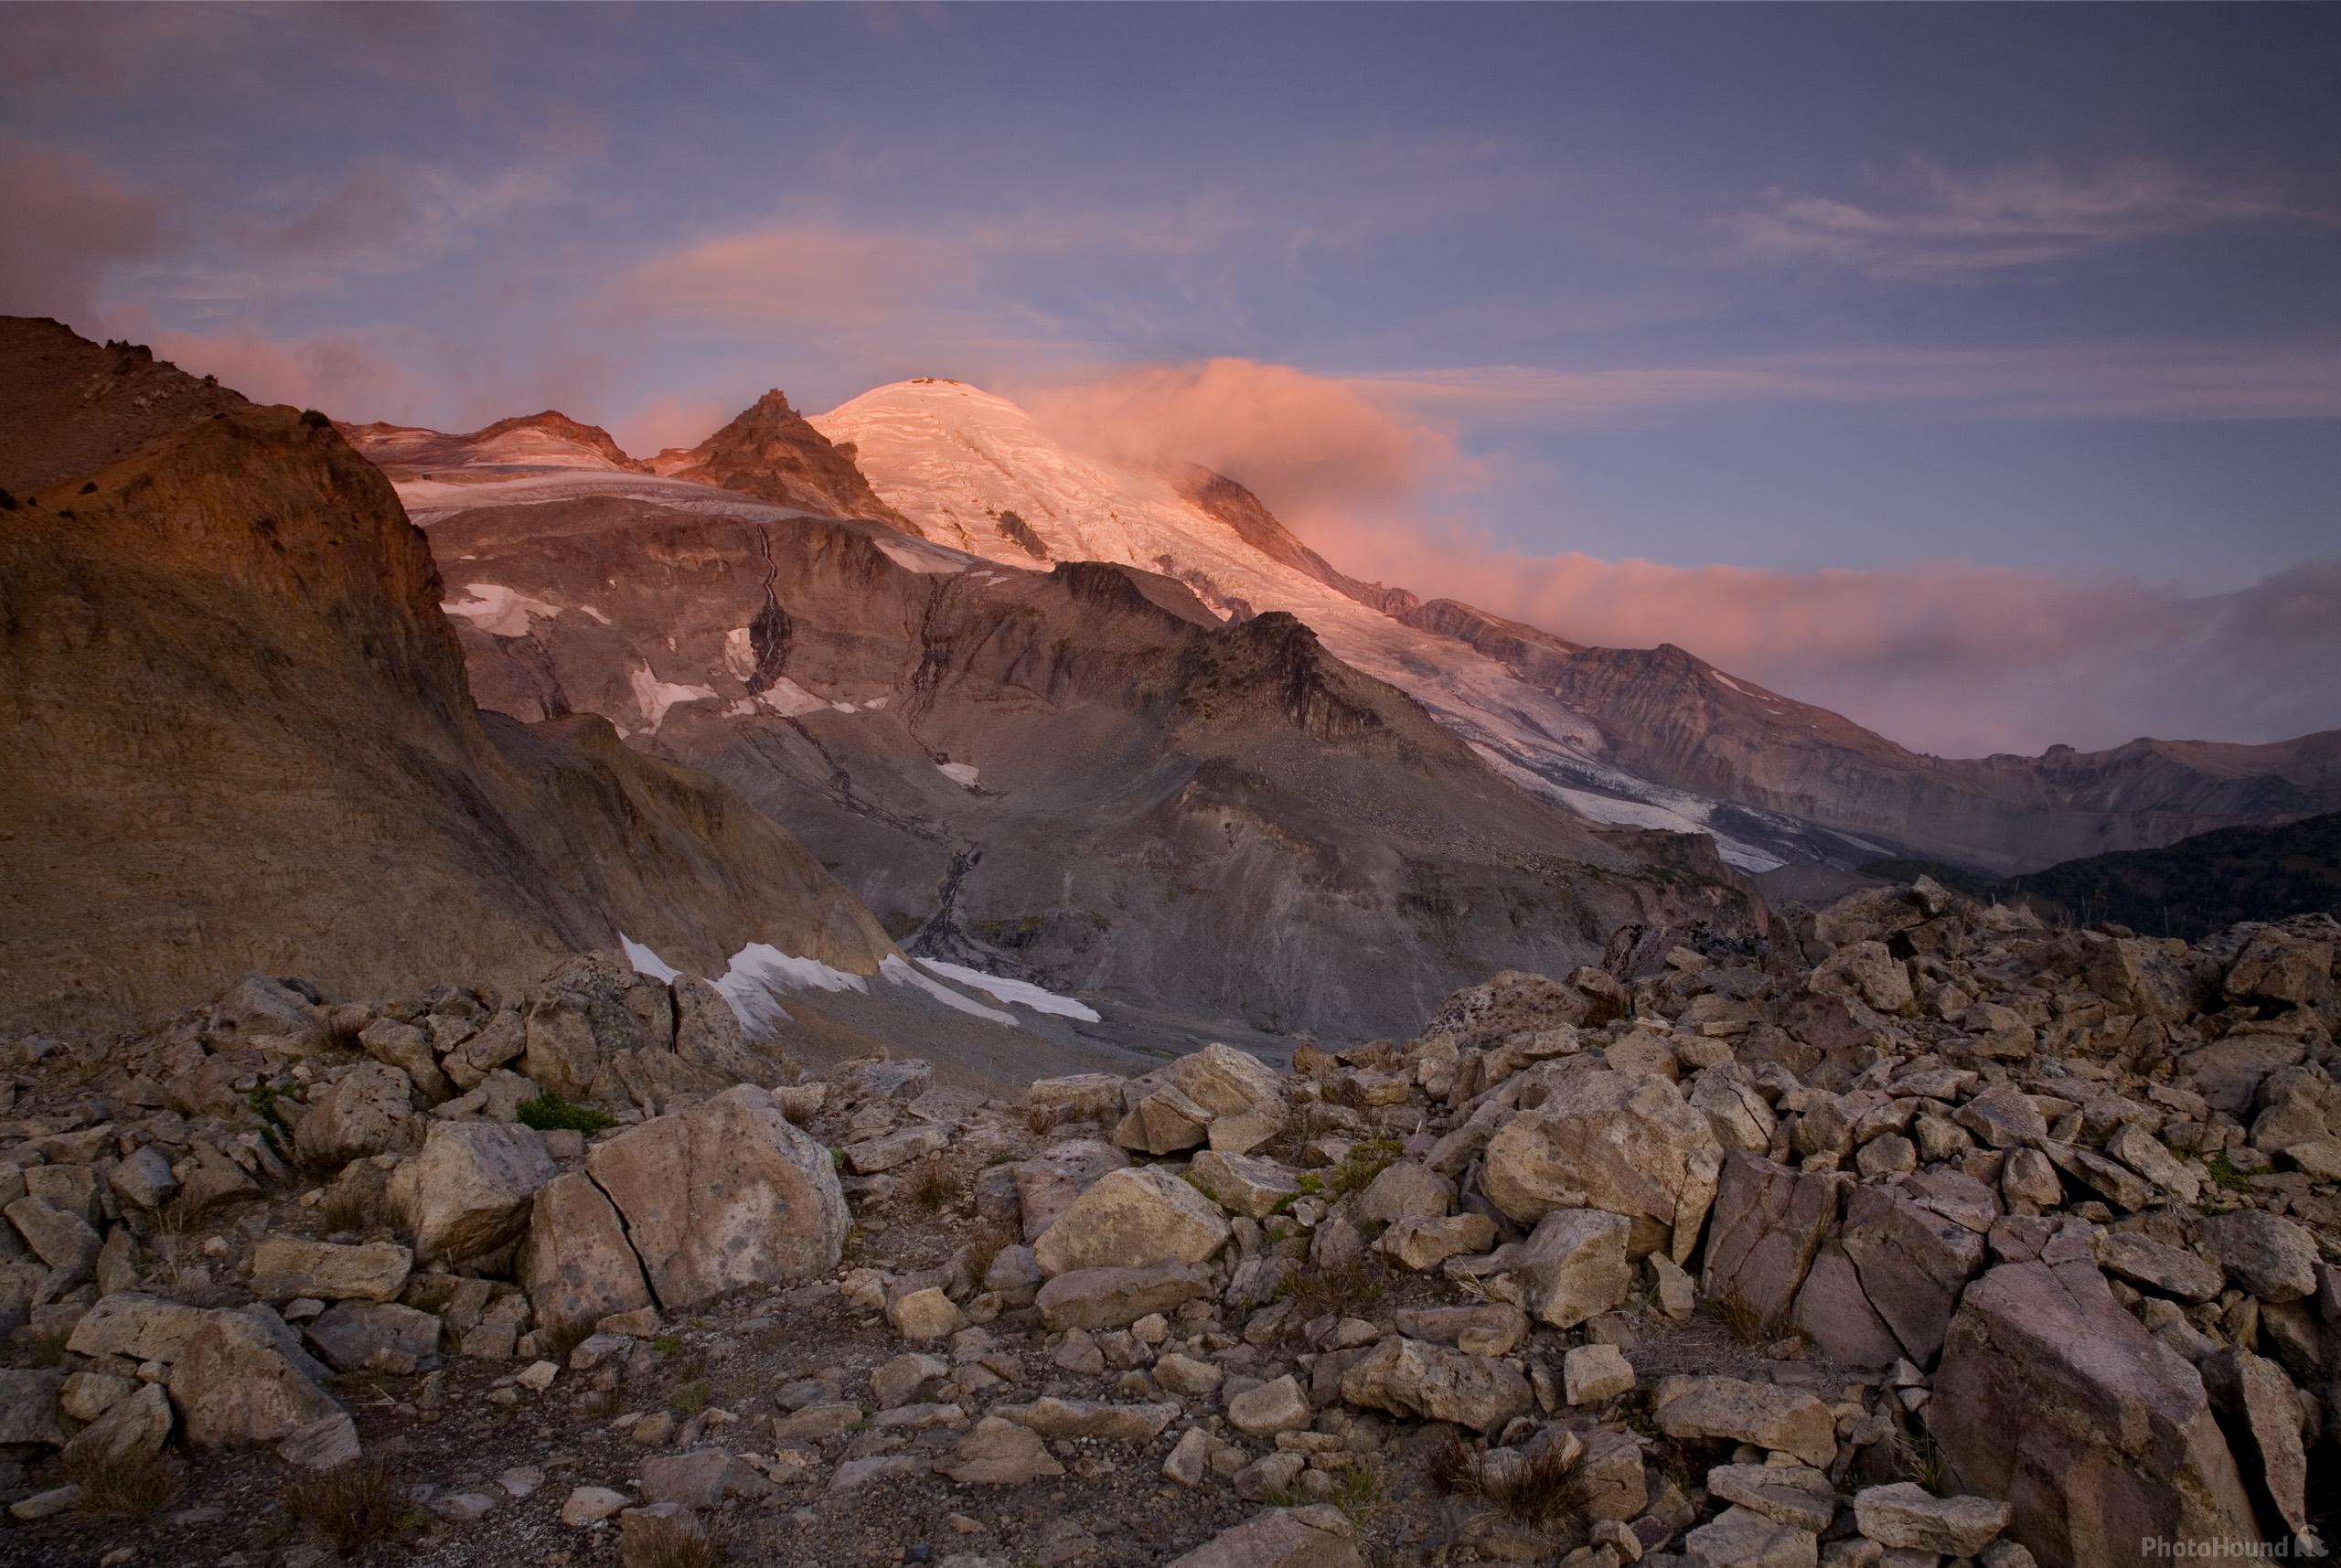 Image of Panhandle Gap, Mount Rainier National Park by T. Kirkendall and V. Spring